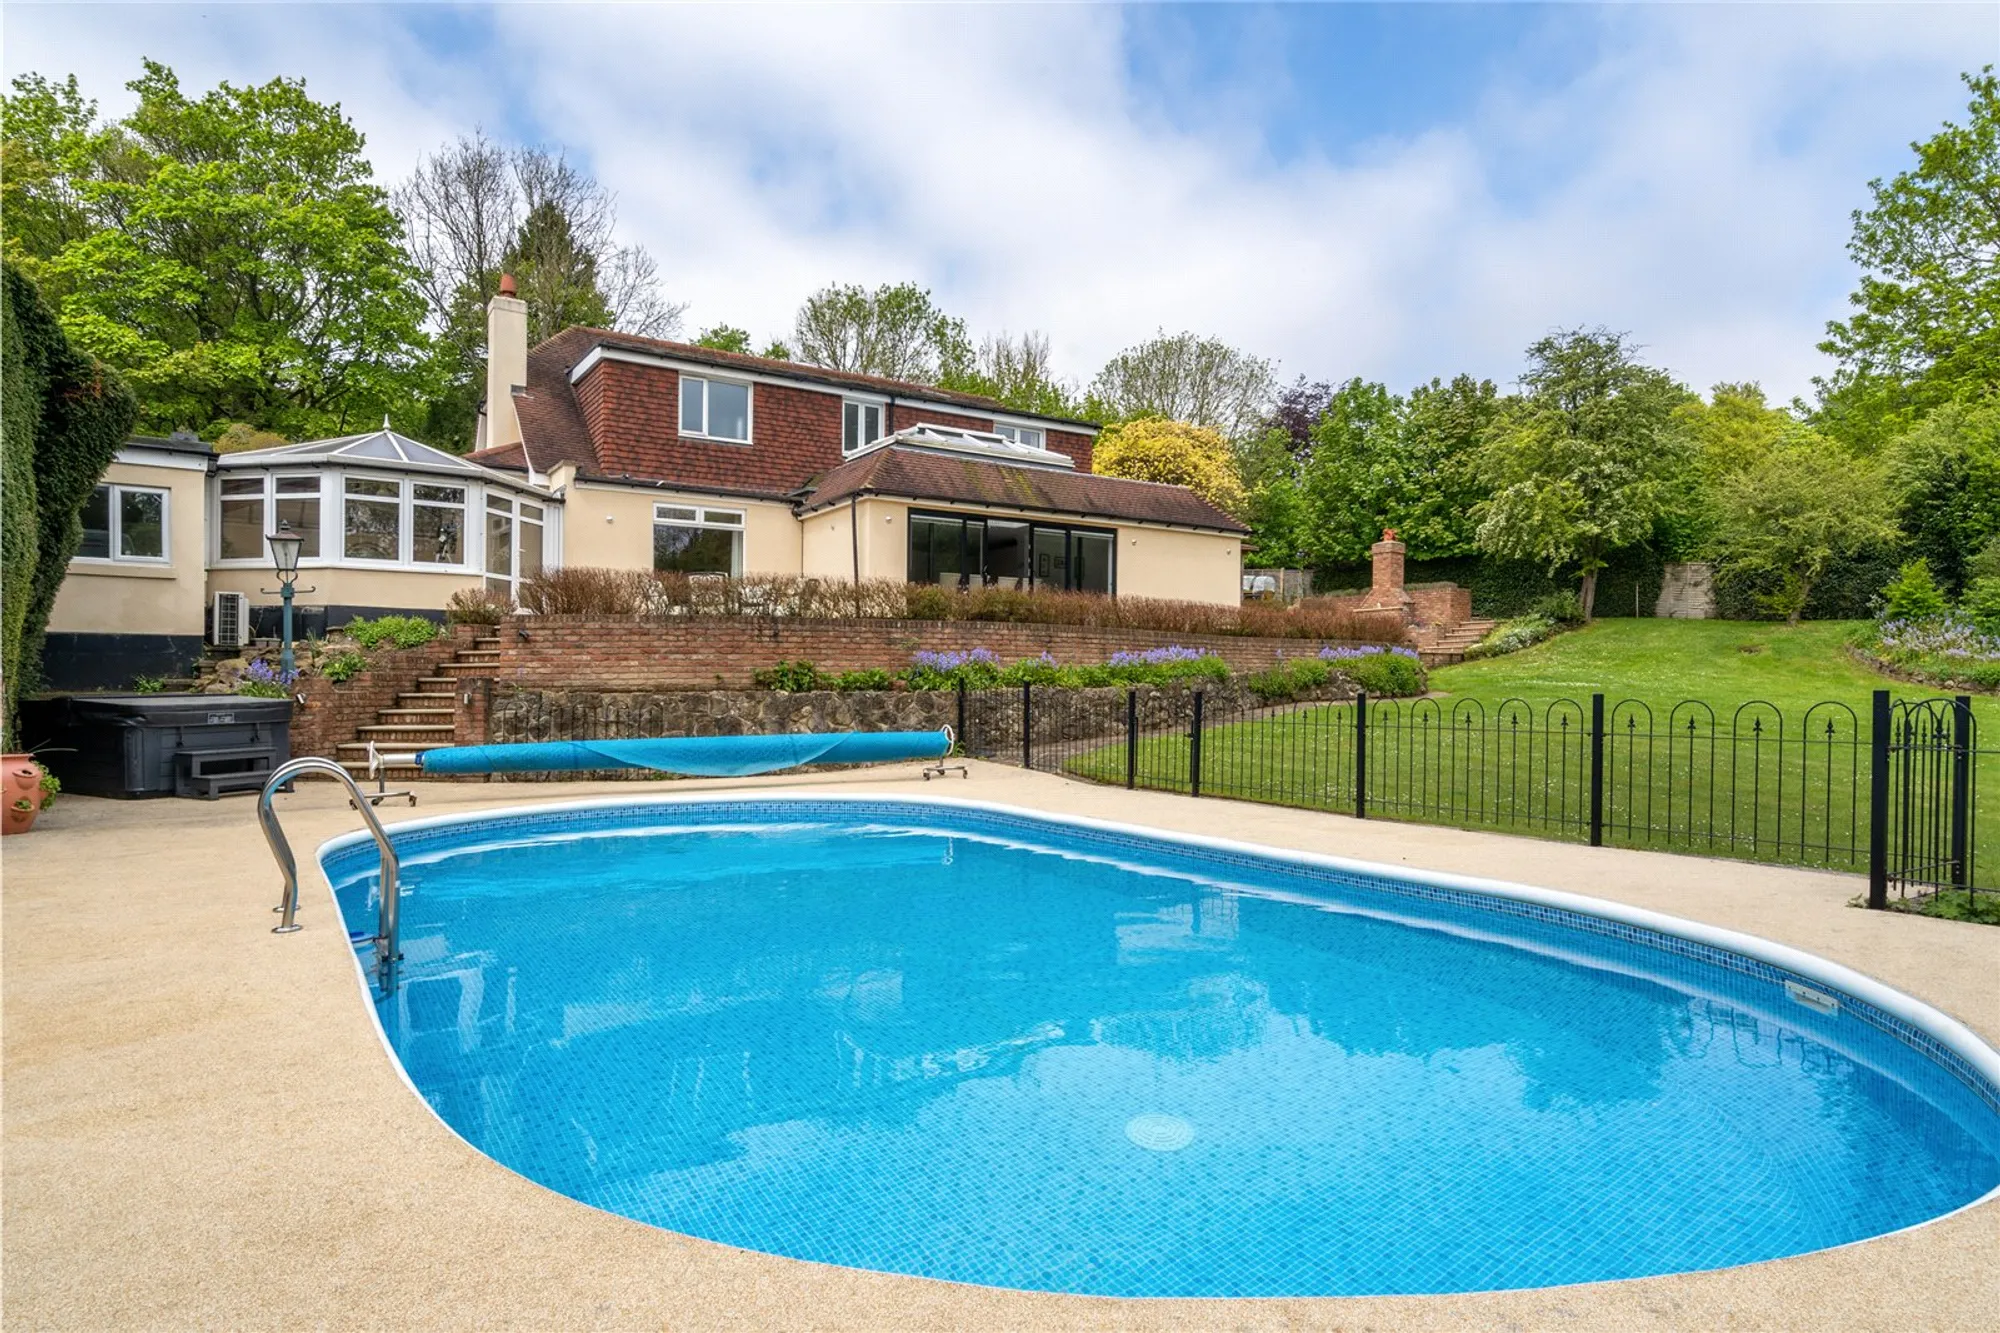 5 bed detached house for sale in Butlers Dene Road, Caterham  - Property Image 3